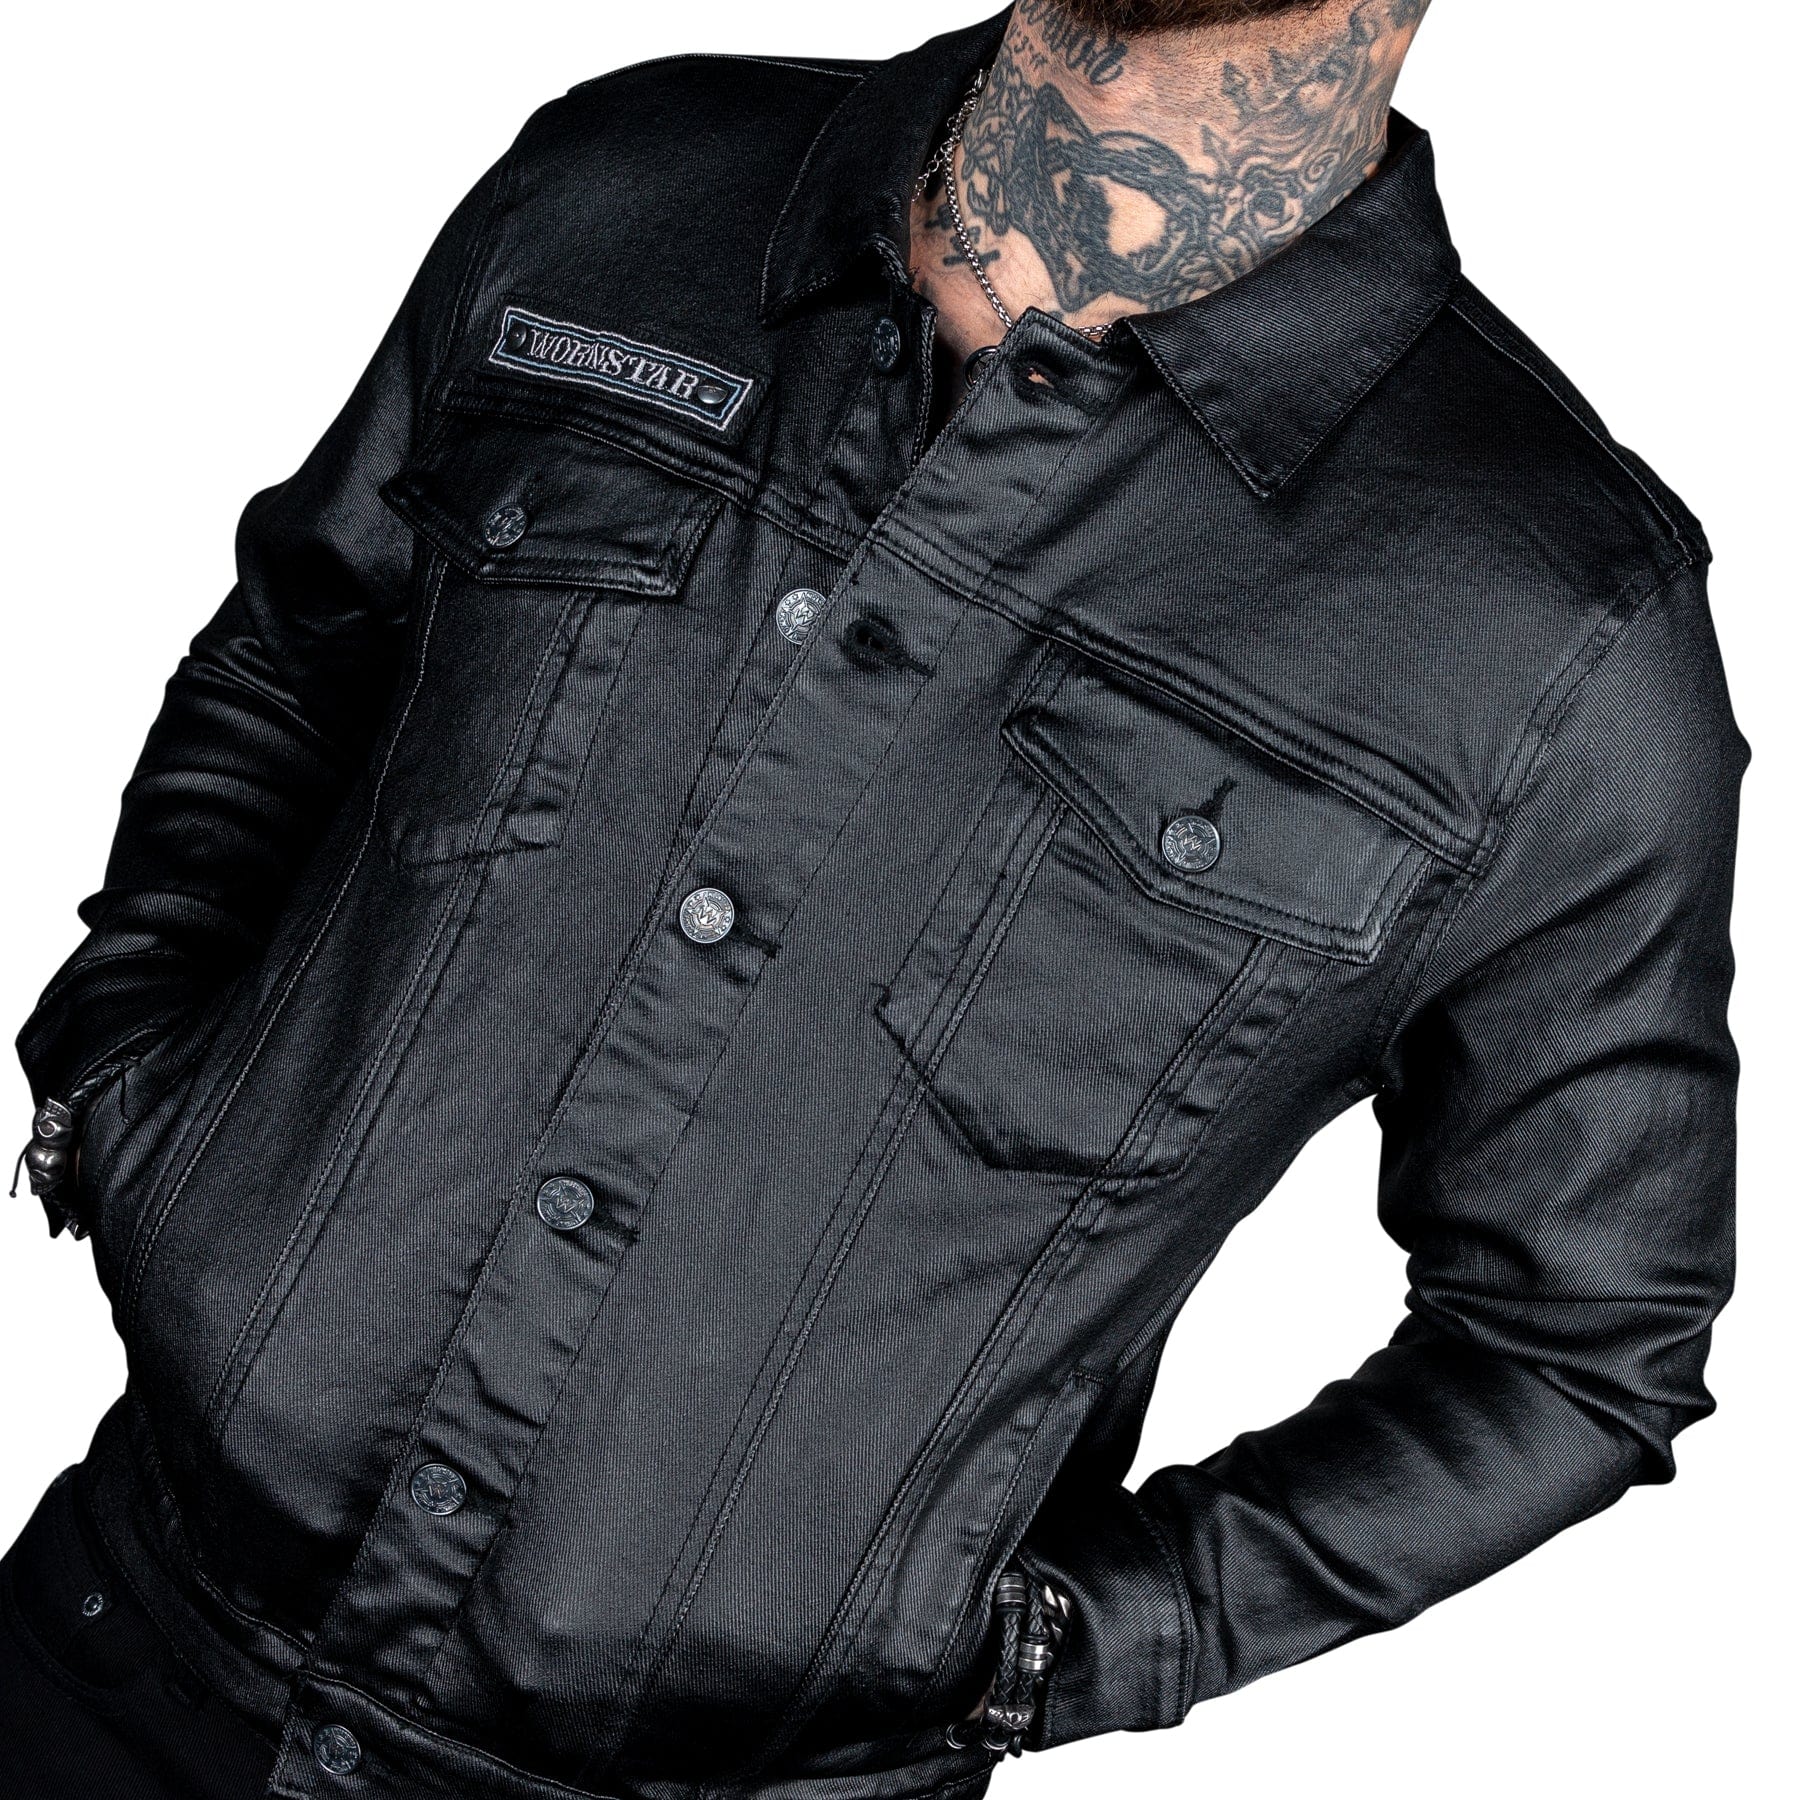 Discover 167+ mens denim style leather jacket latest